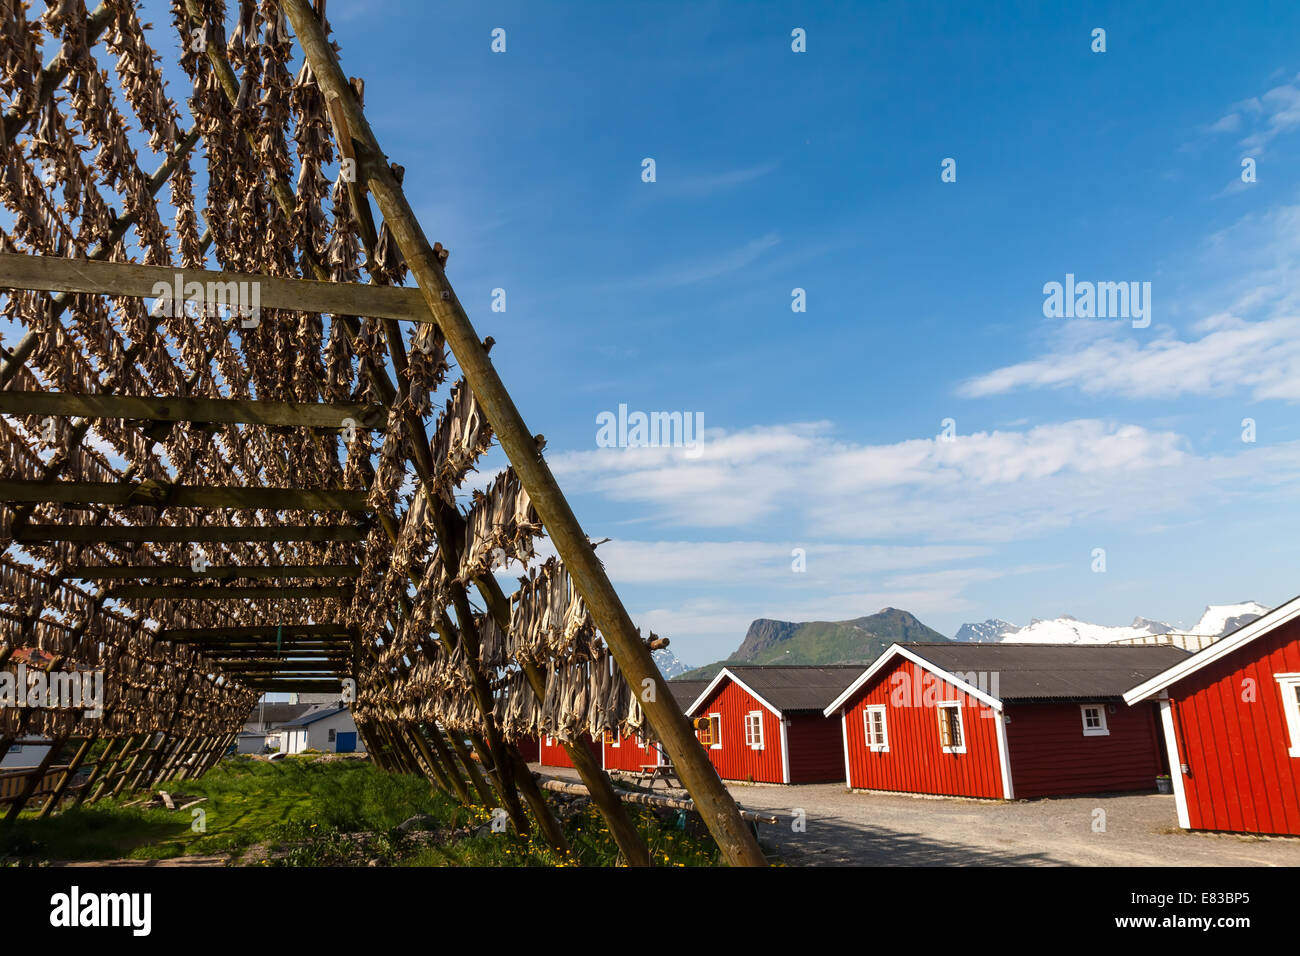 Cod fish at the drying racks and traditional Norwegian house rorbu, Lofoten, Norway Stock Photo